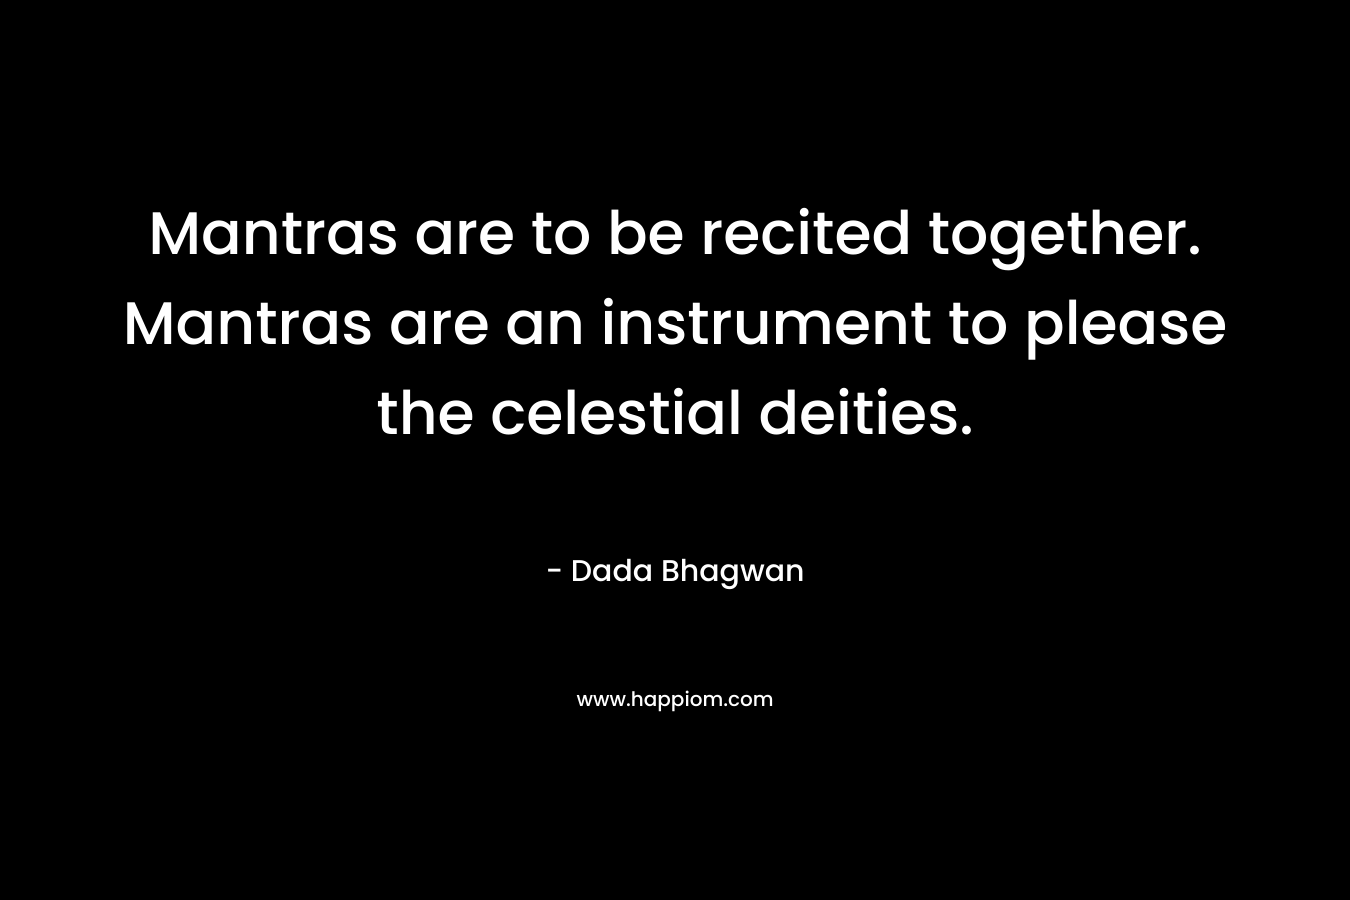 Mantras are to be recited together. Mantras are an instrument to please the celestial deities.